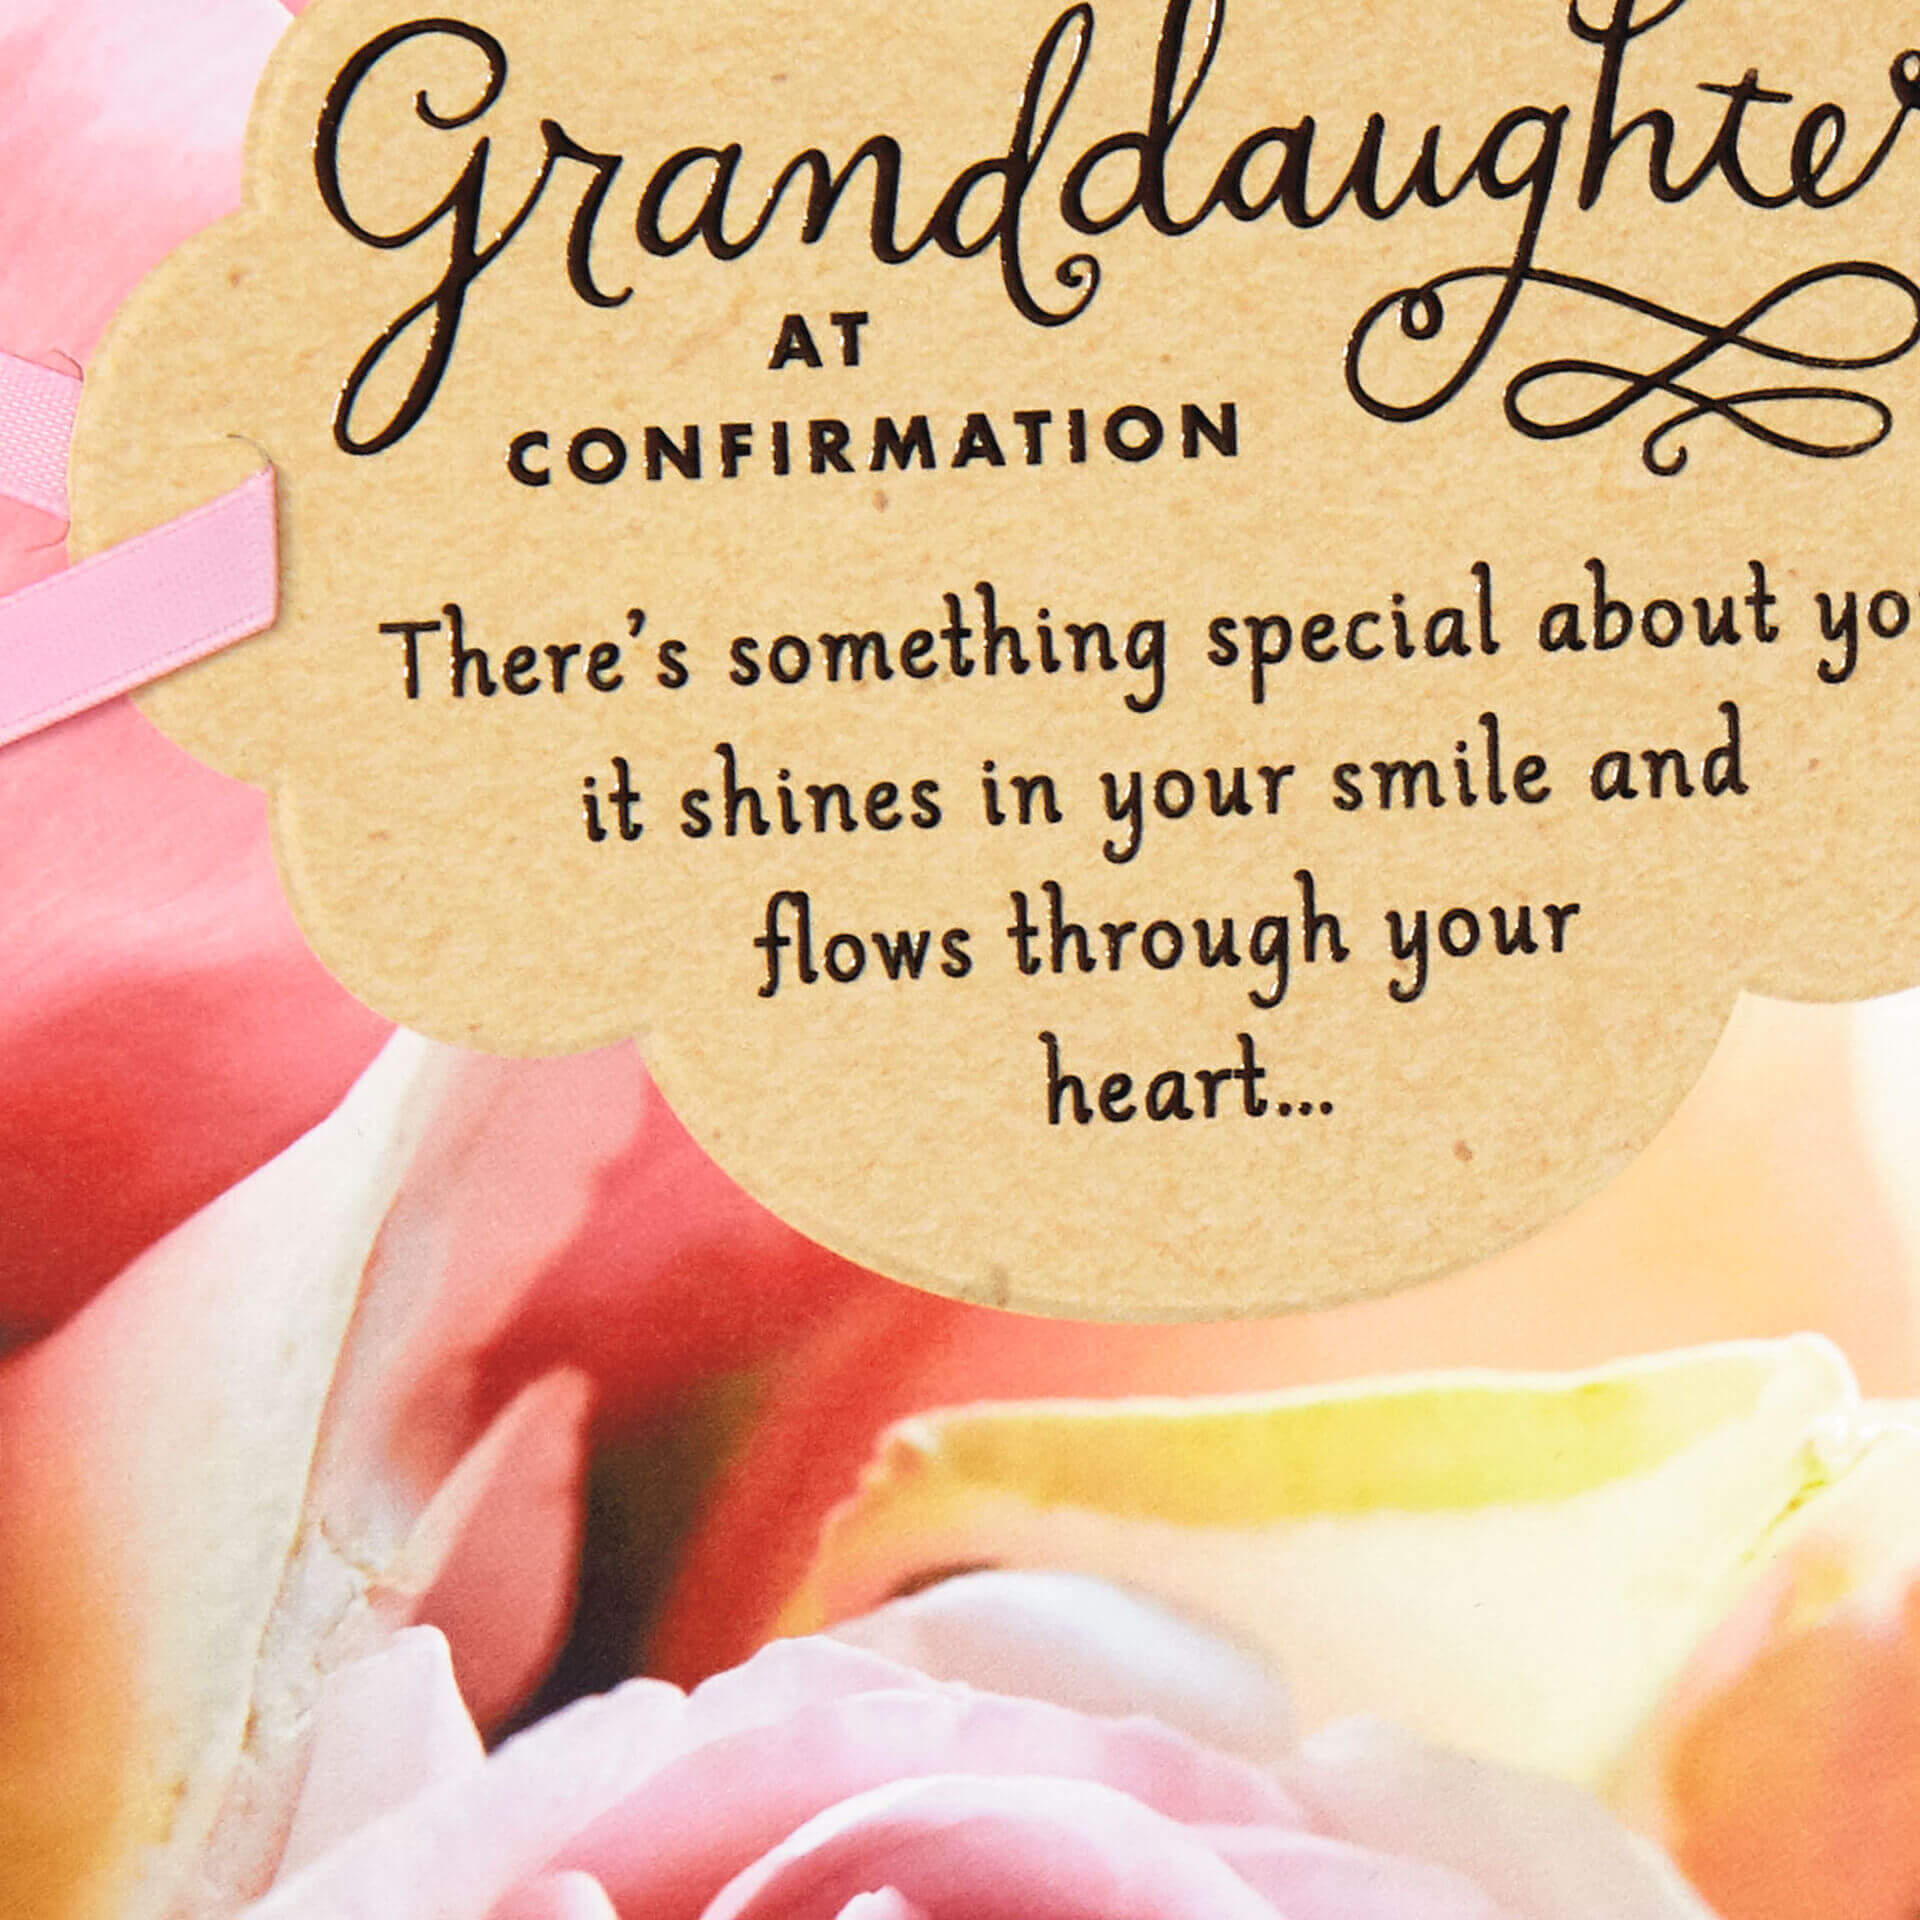 online-best-choice-guaranteed-100-authentic-granddaughter-confirmation